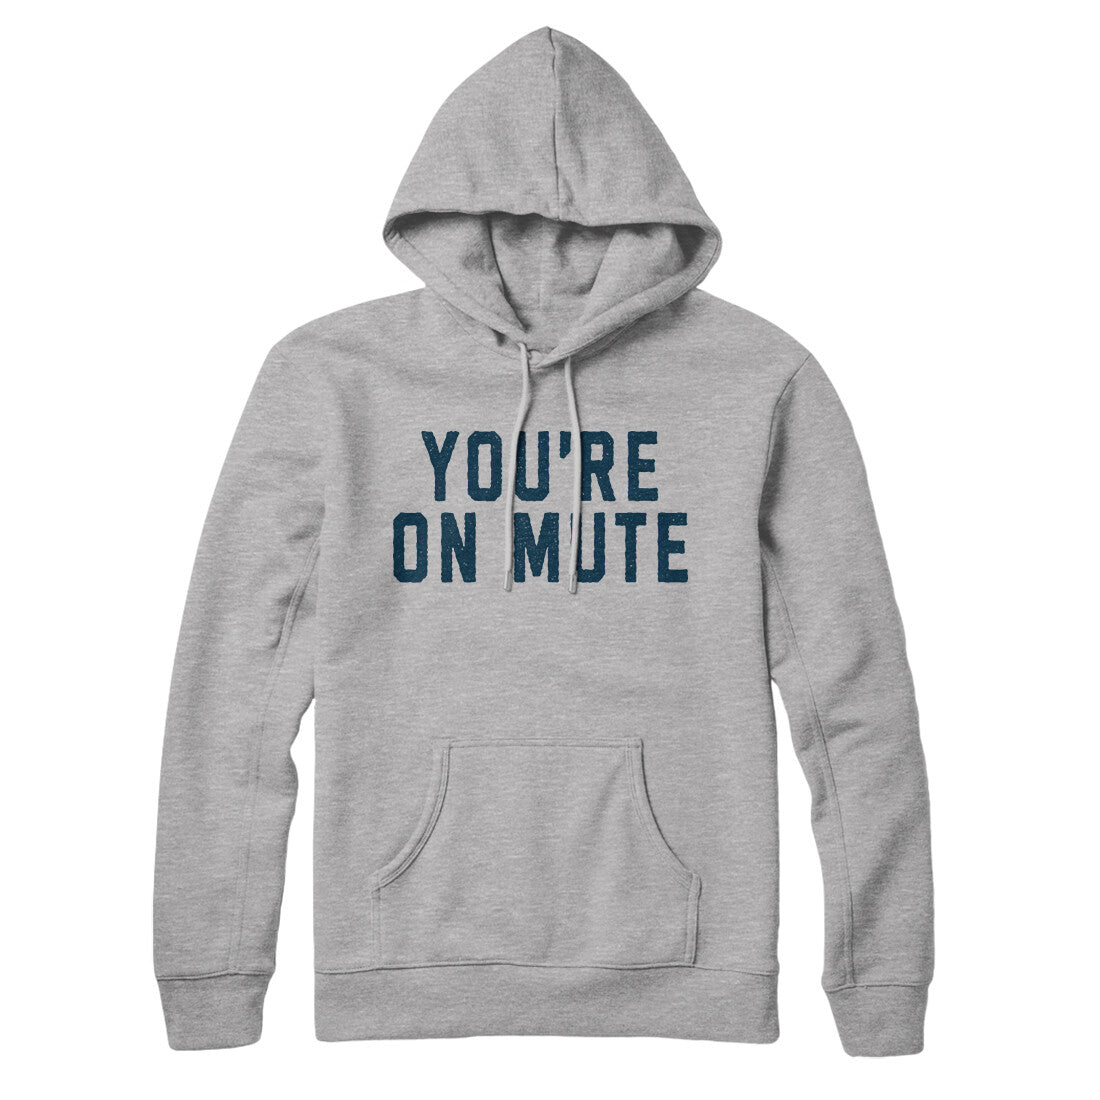 You're on Mute in Heather Grey Color